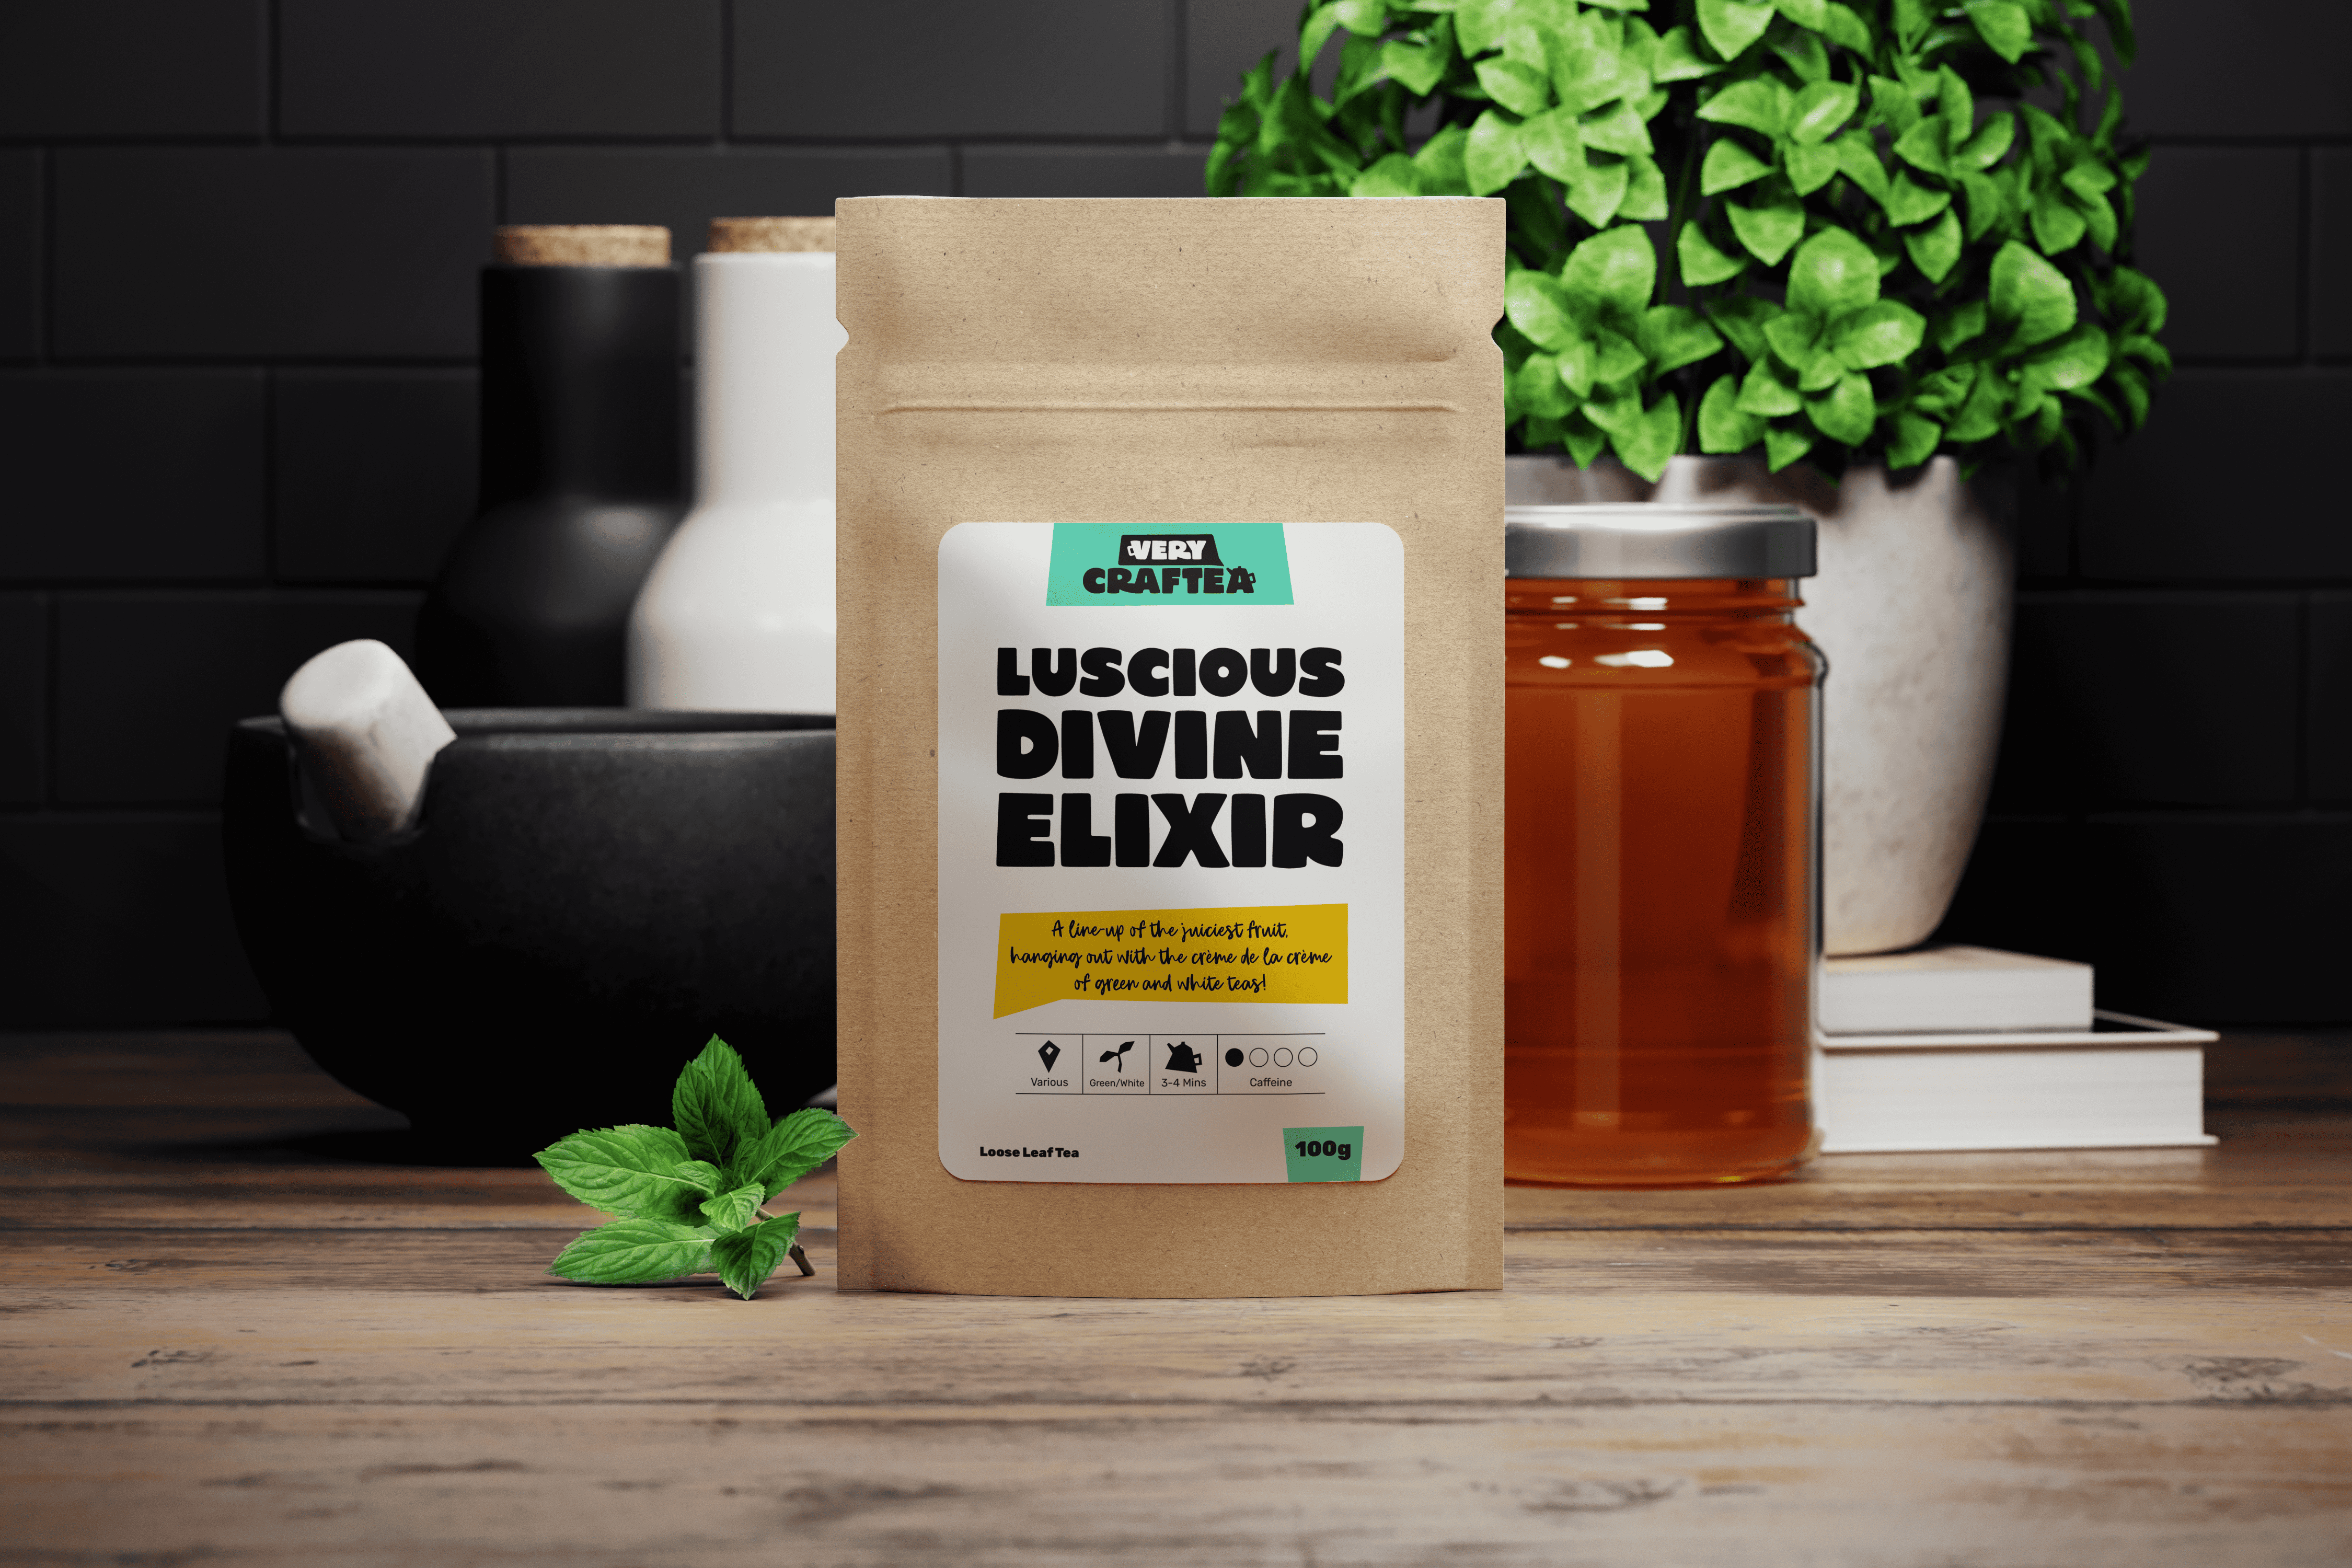 Packaging photo of 75g of Luscious Divine Elixir loose leaf green and white tea in biodegradable kraft bag from Very Craftea